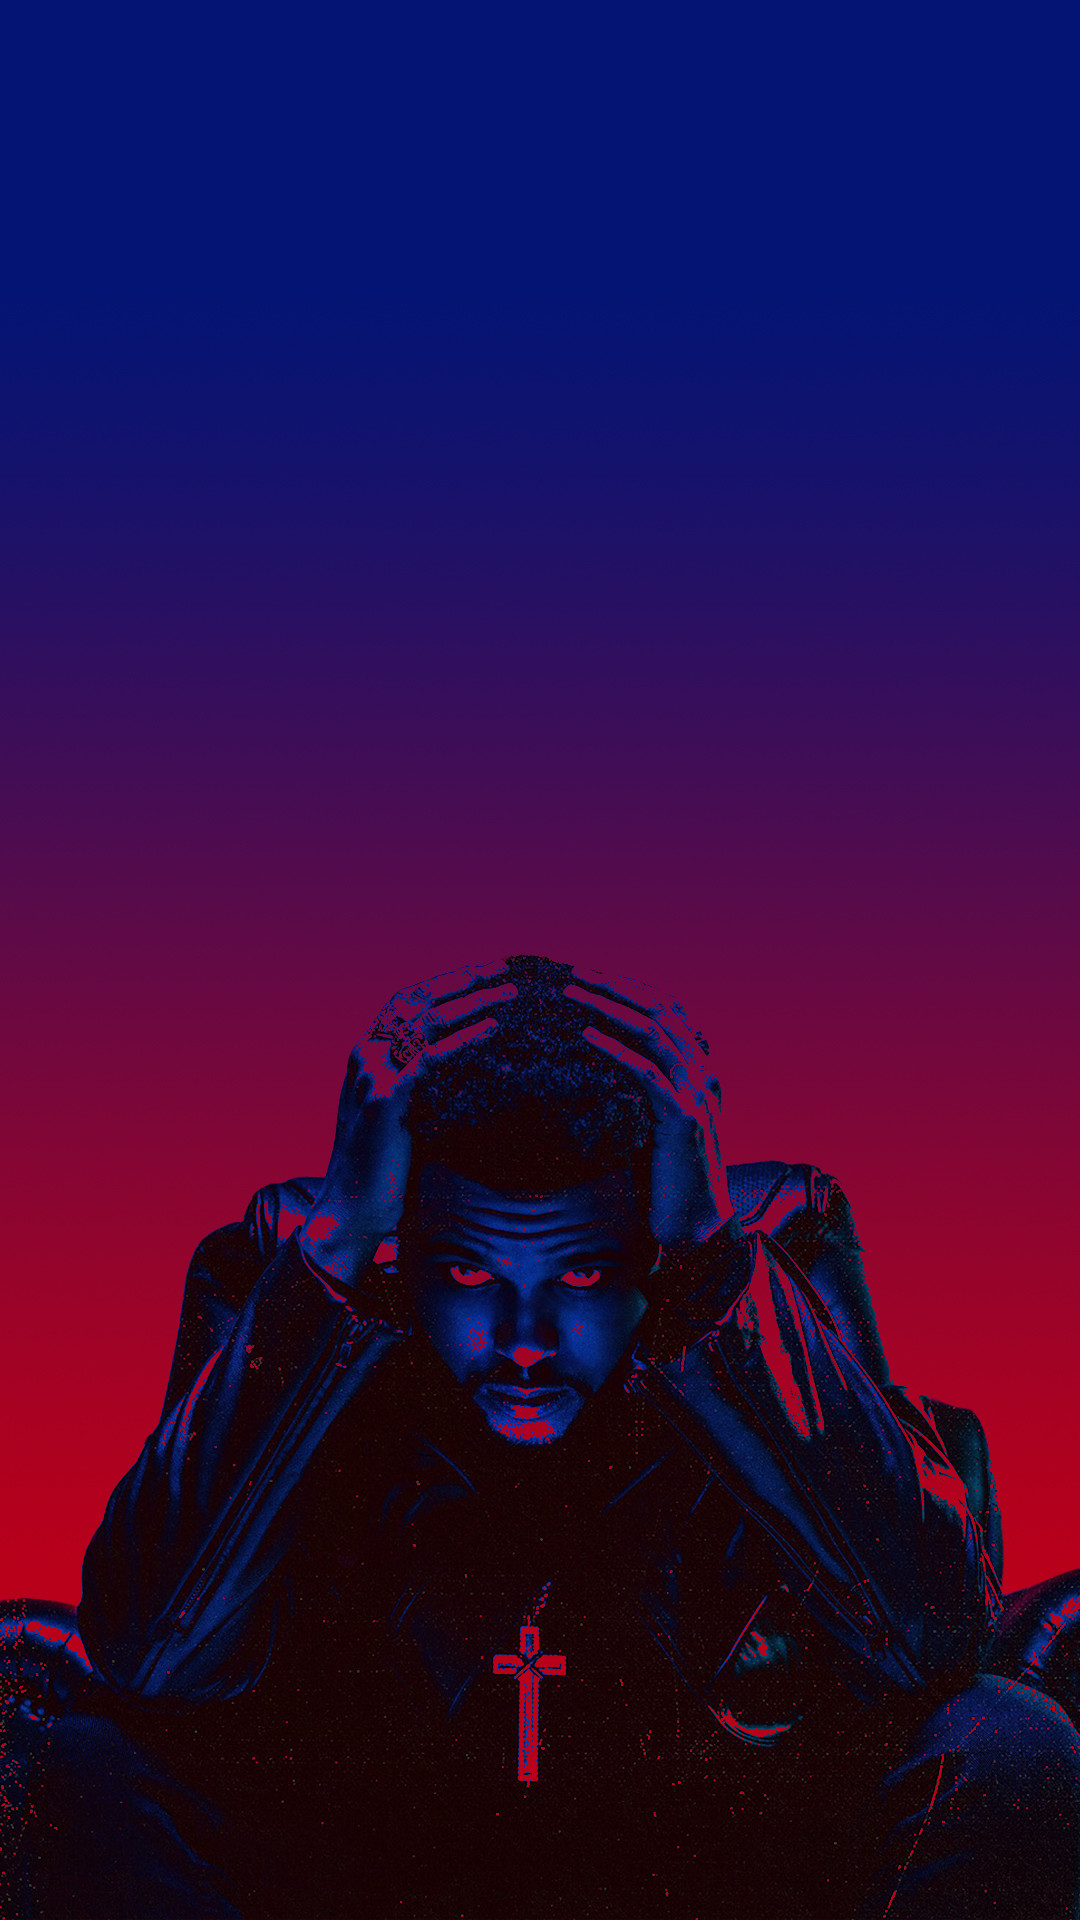 The weeknd starboy full album download free music